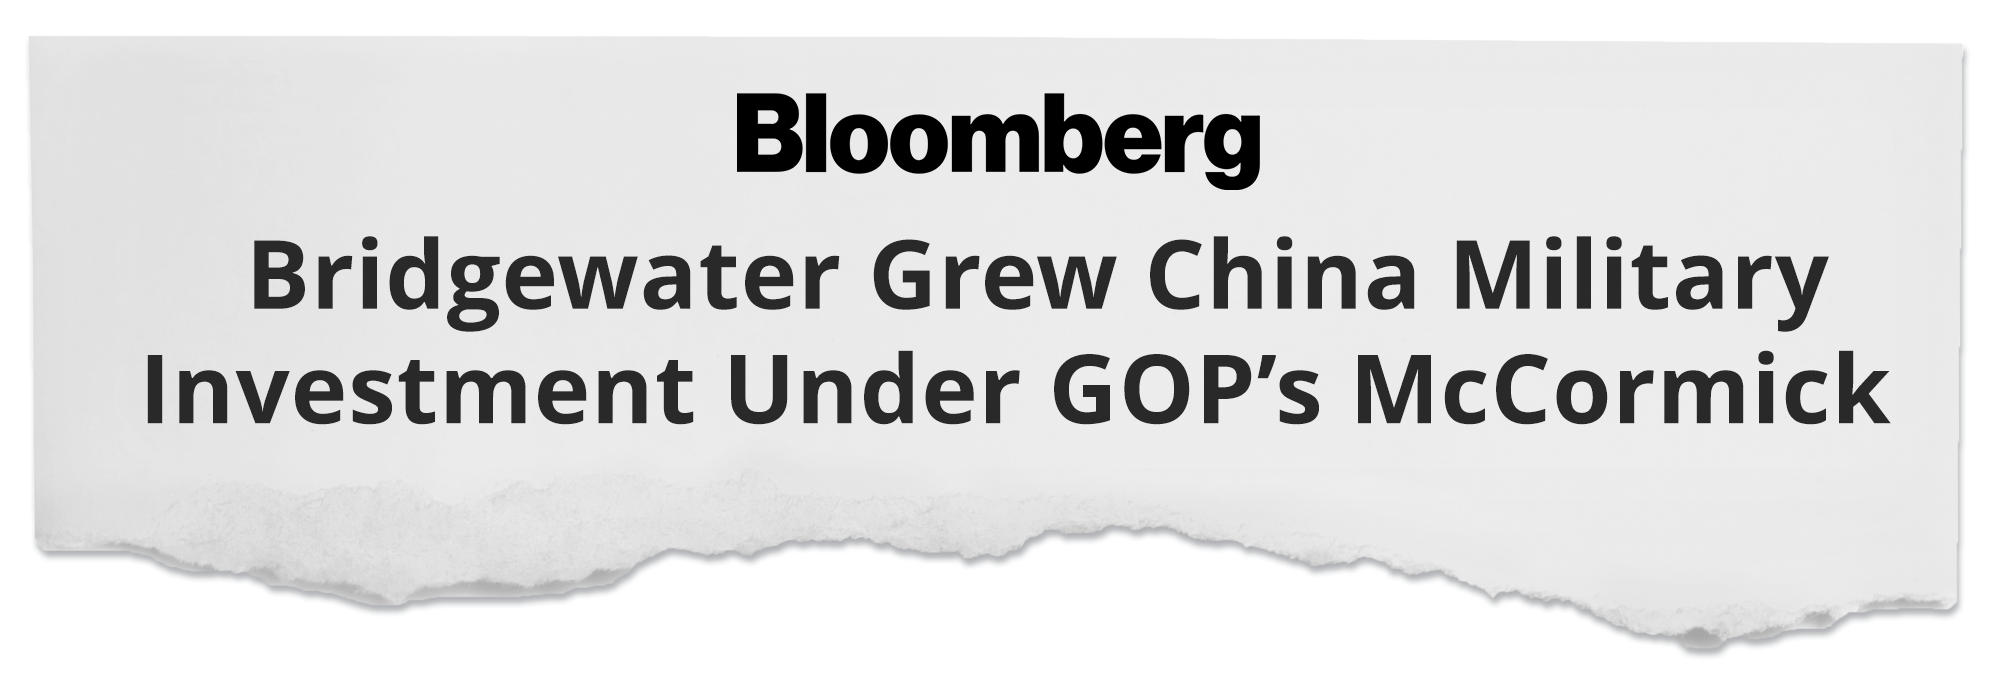 https://www.bloomberg.com/news/articles/2024-04-12/bridgewater-grew-china-military-investment-under-gop-s-mccormick?embedded-checkout=true